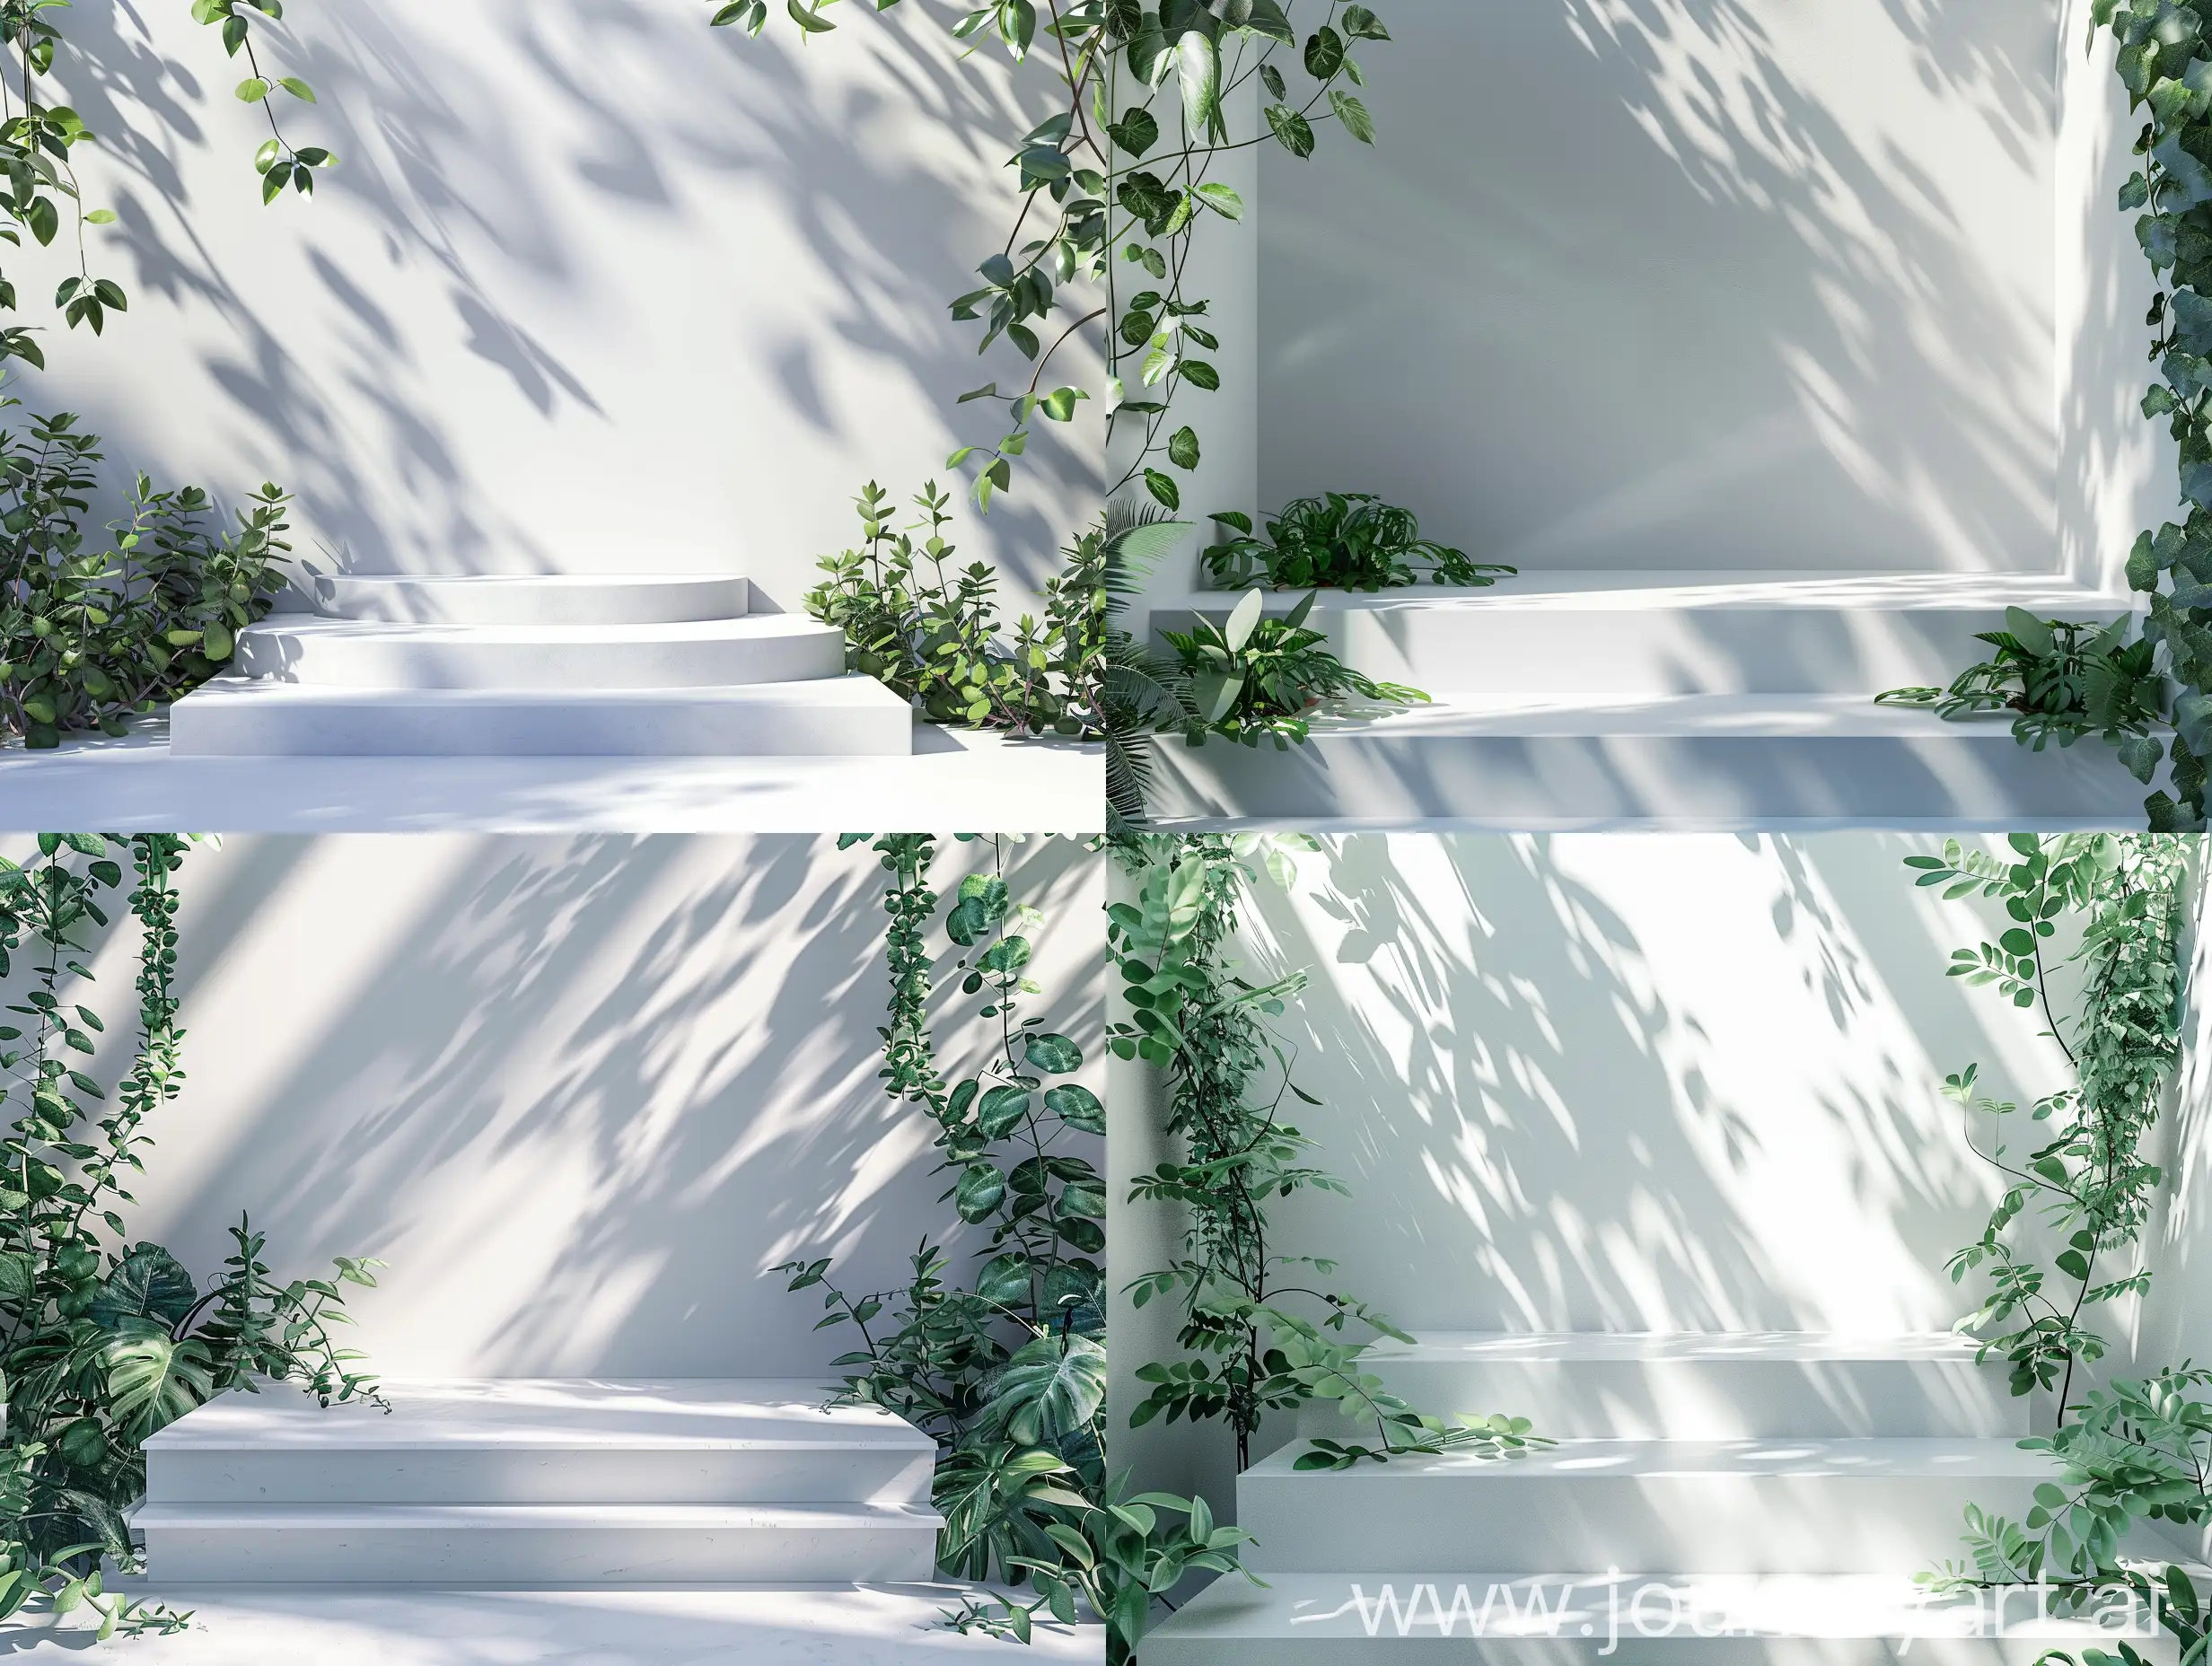 Minimalist-White-Tiered-Platform-with-Greenery-and-Shadows